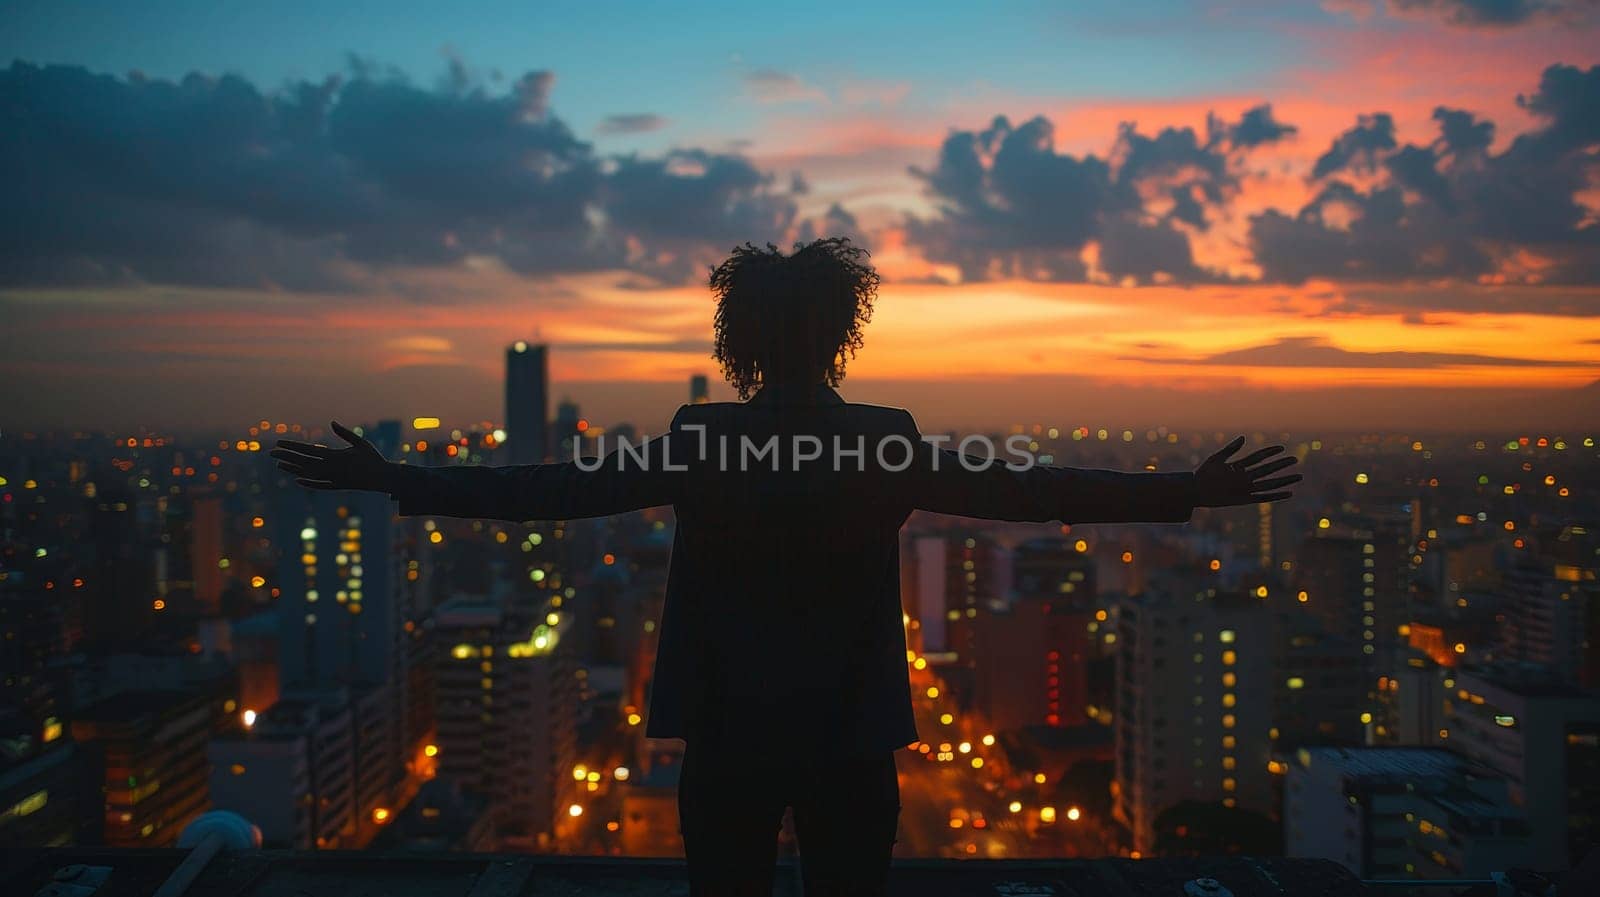 A businesswoman stands arms outstretched with embracing the vast cityscape below, Freedom woman by nijieimu